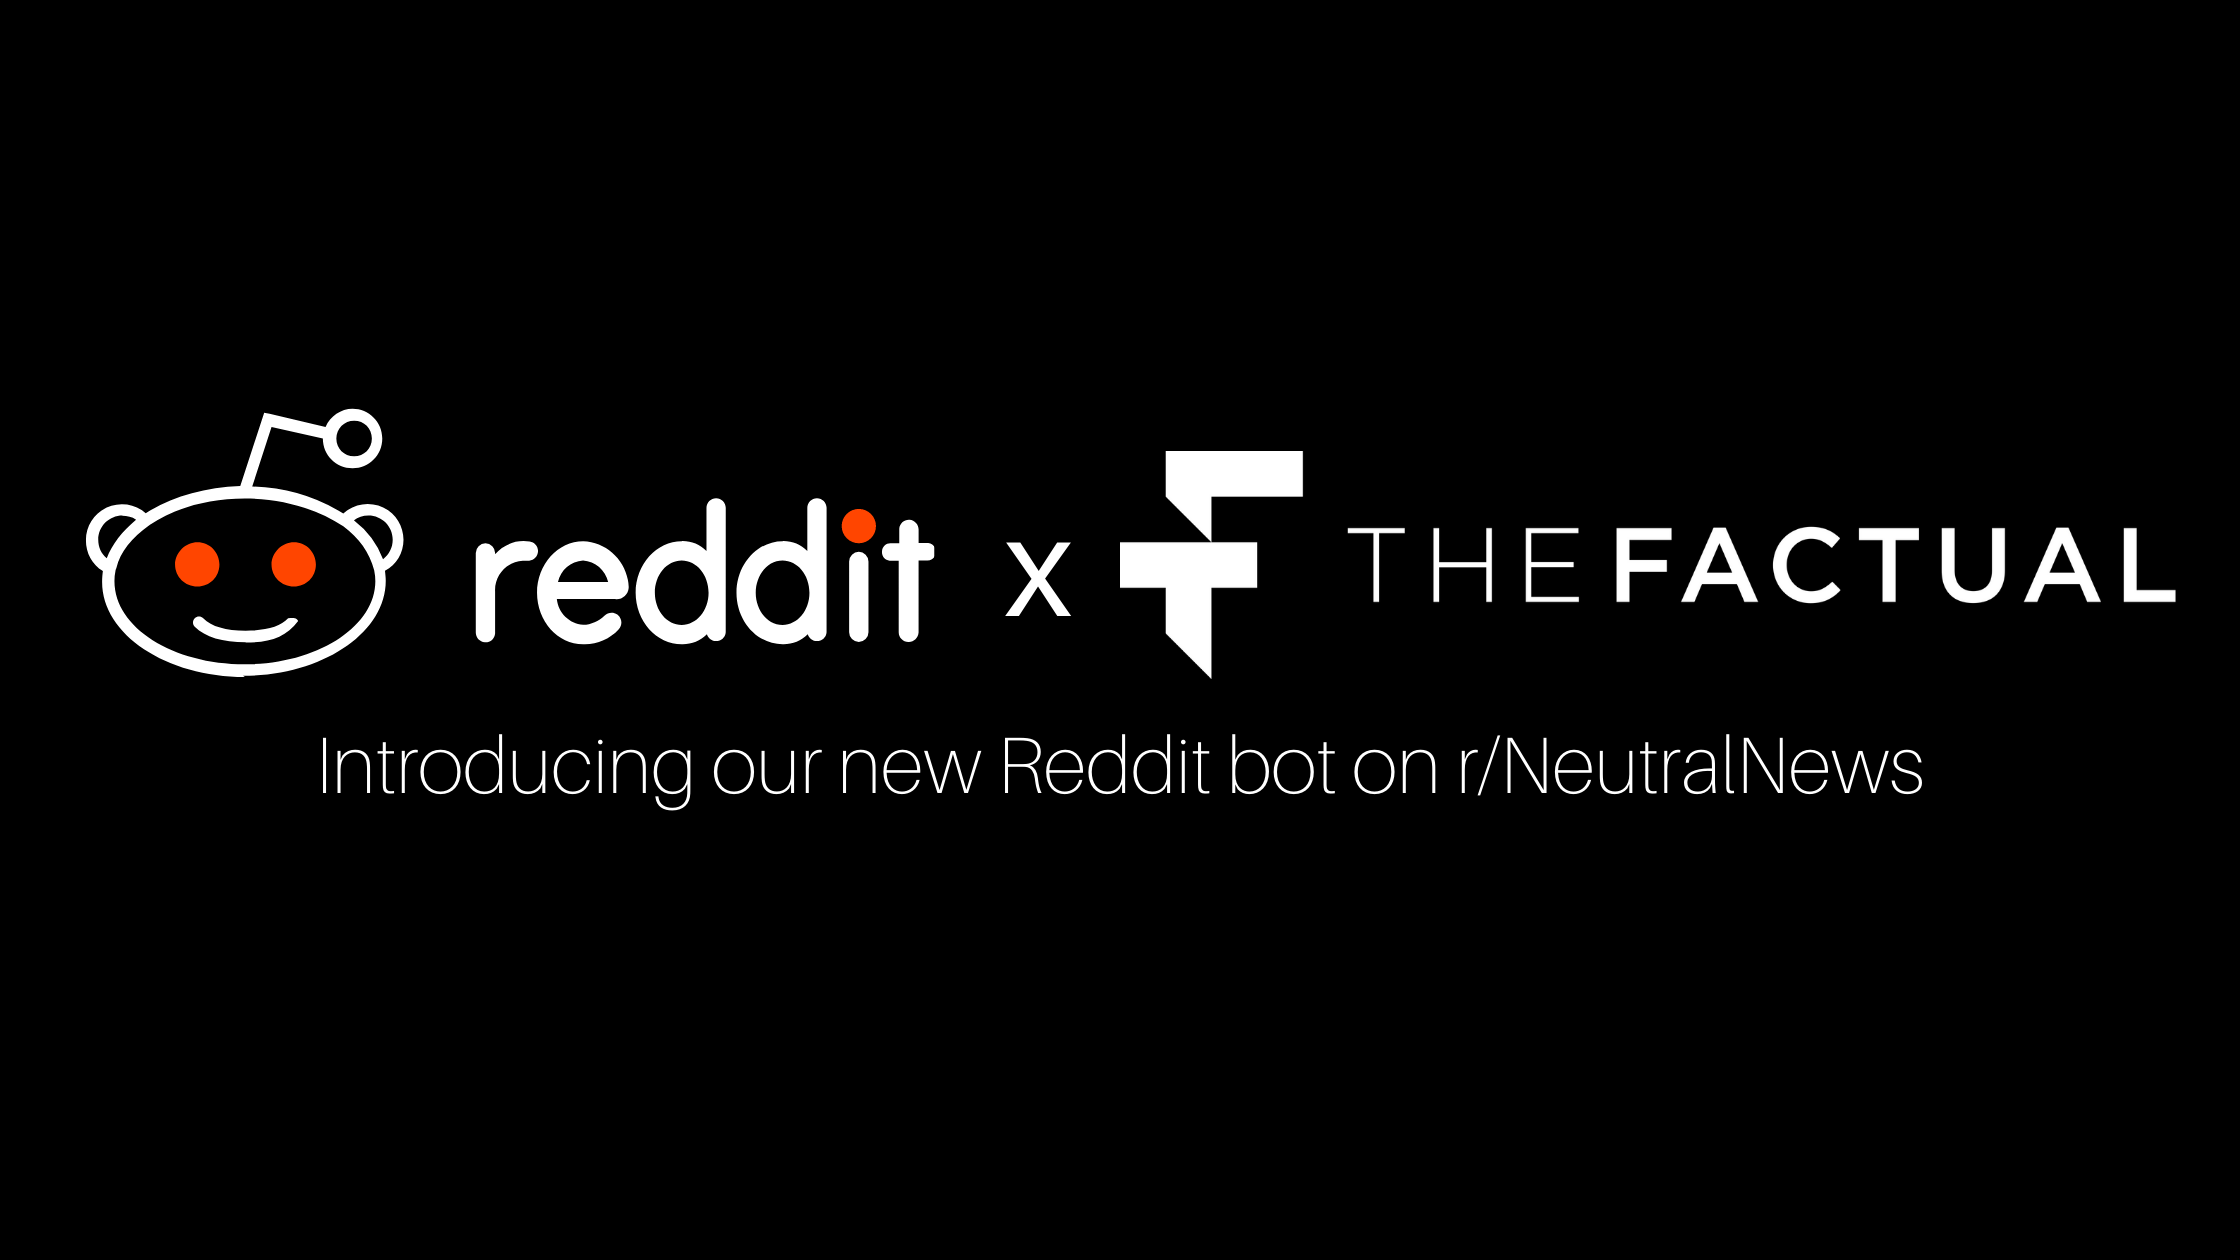 The Factual Bot: Helping Reddit Users Have Balanced Discussions on the News